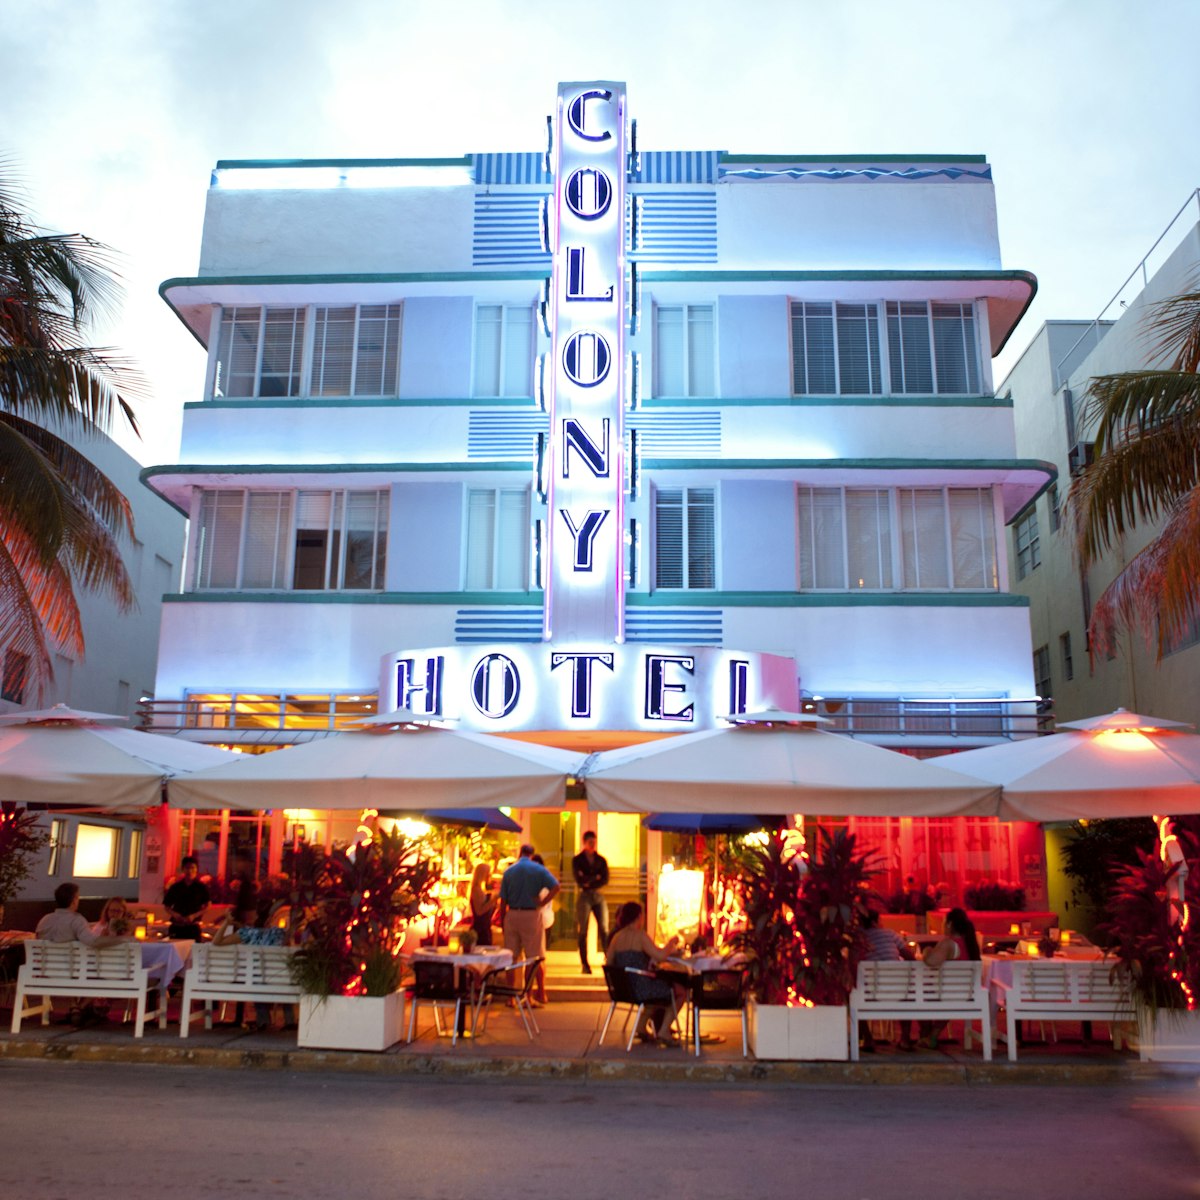 Lonely Planet Traveller Magazine, Issue 36, Florida, Perfect trip
Art Deco era Colony Hotel on Ocean Drive.